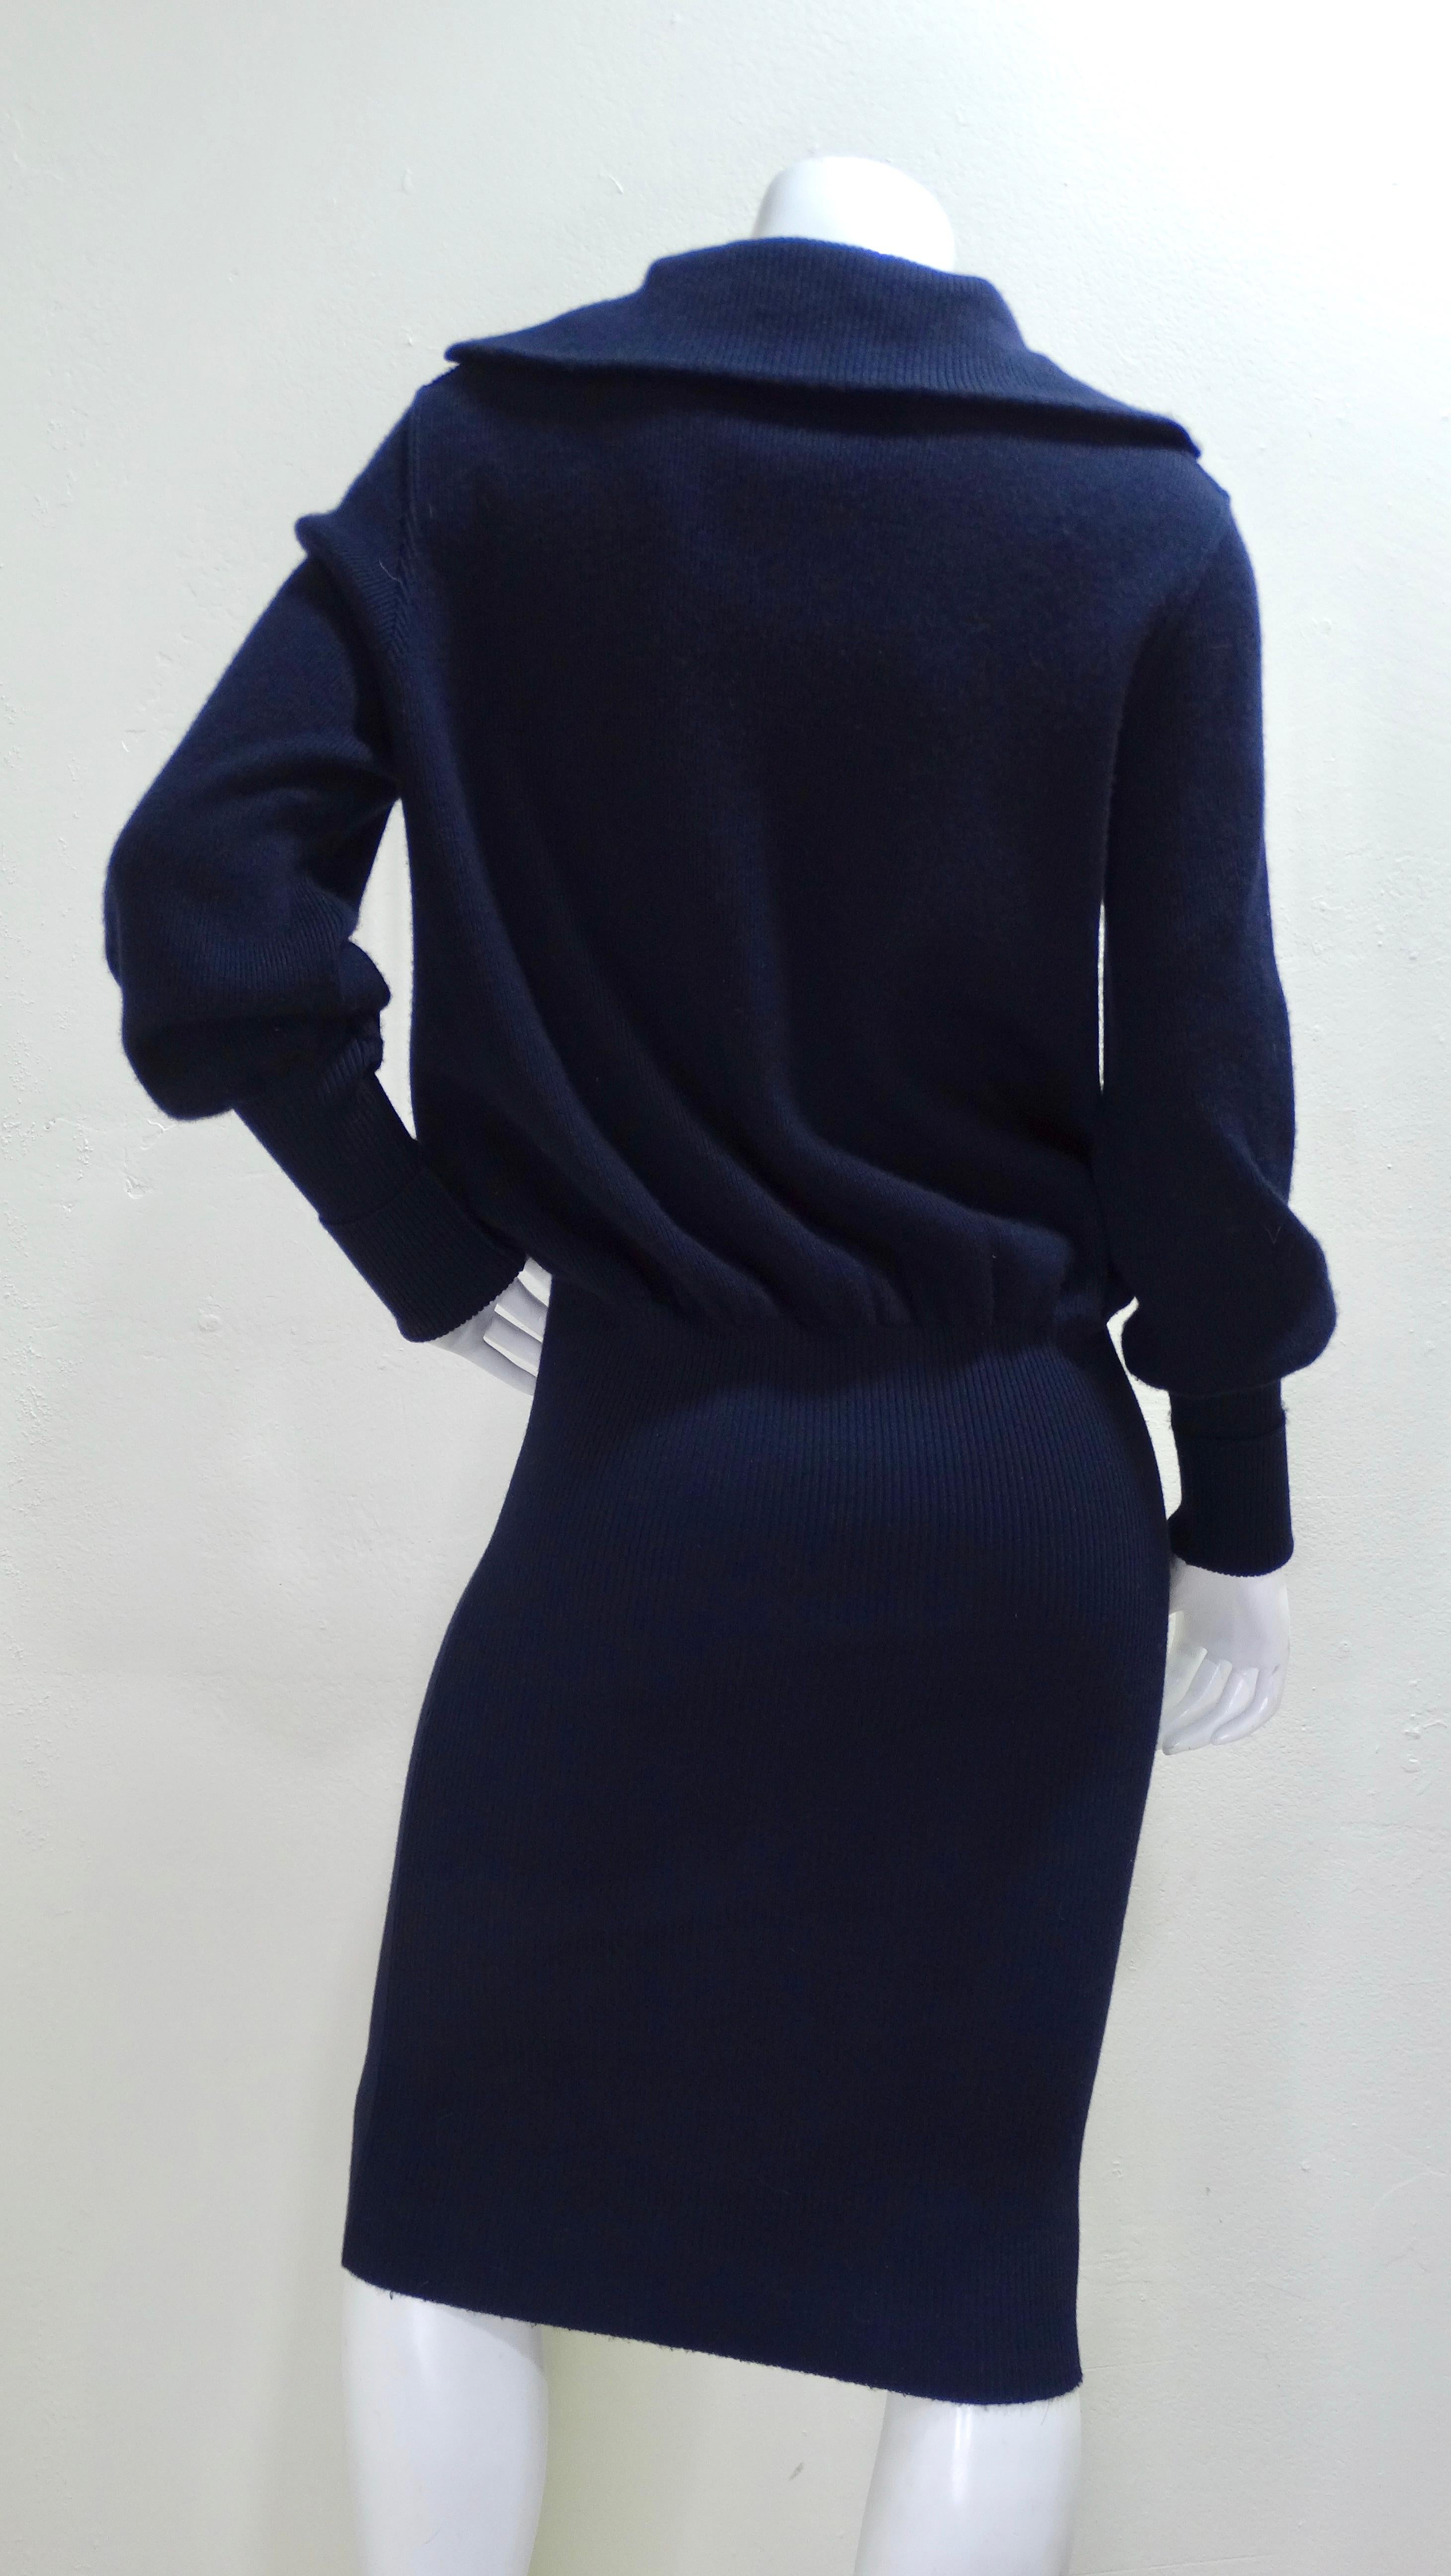 Chanel Cashmere Knit Plane Pins Navy Blue Dress In Excellent Condition For Sale In Scottsdale, AZ